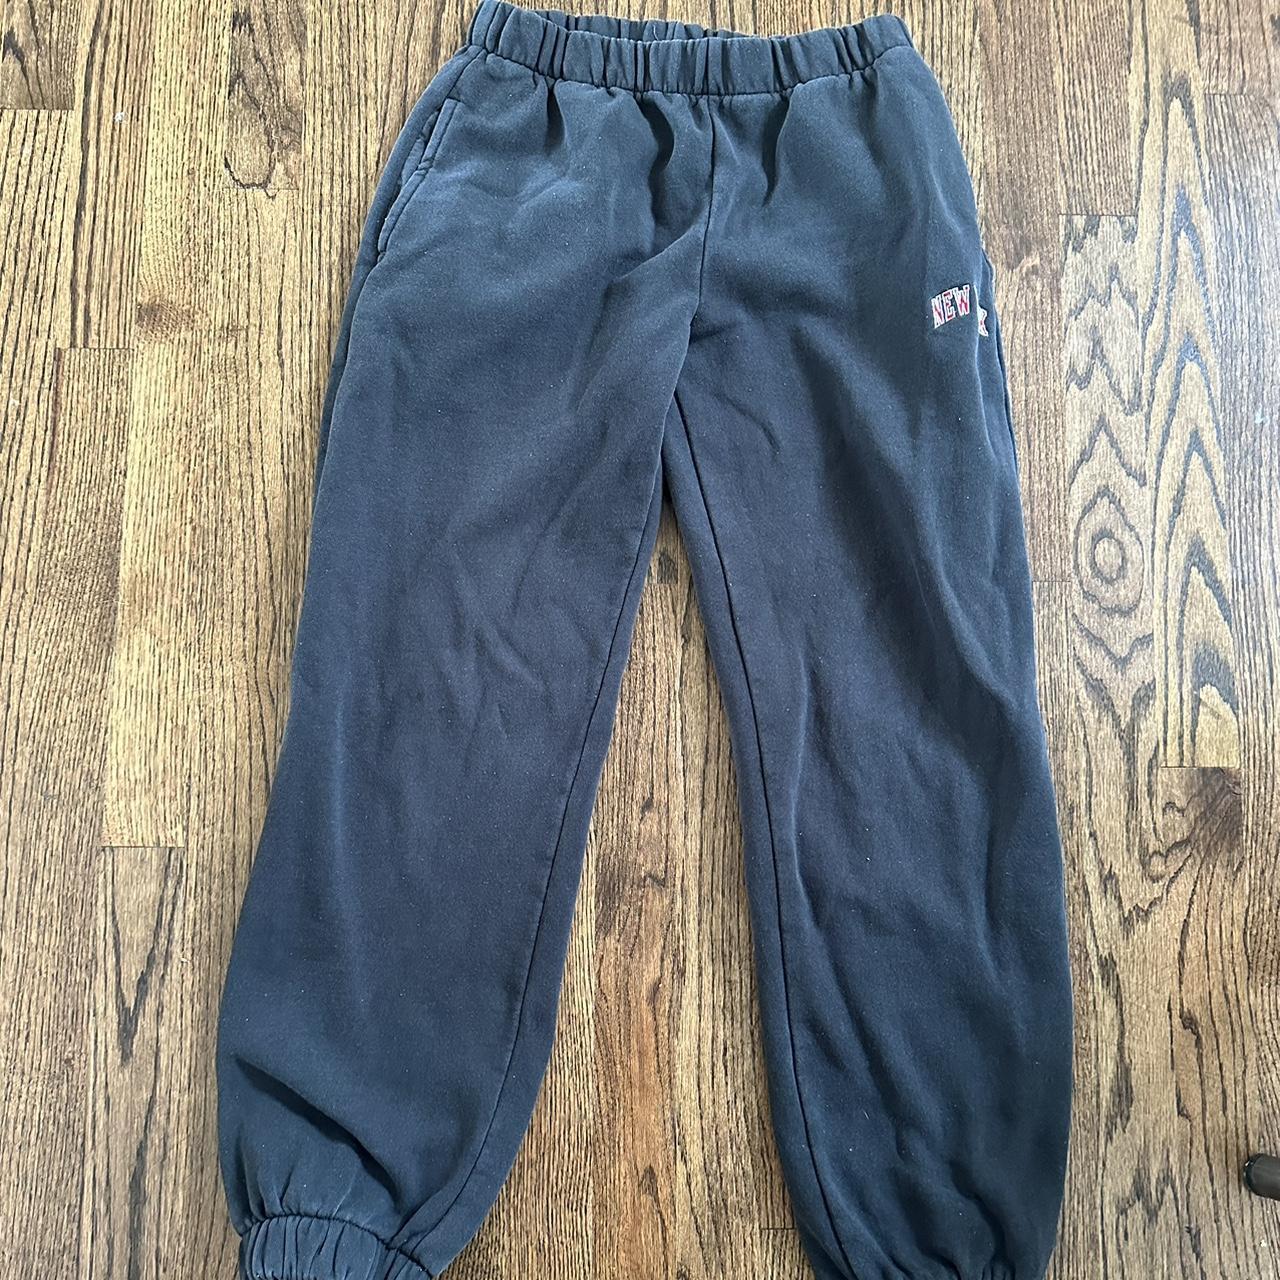 New York rosa sweatpant from Brandy Melville!